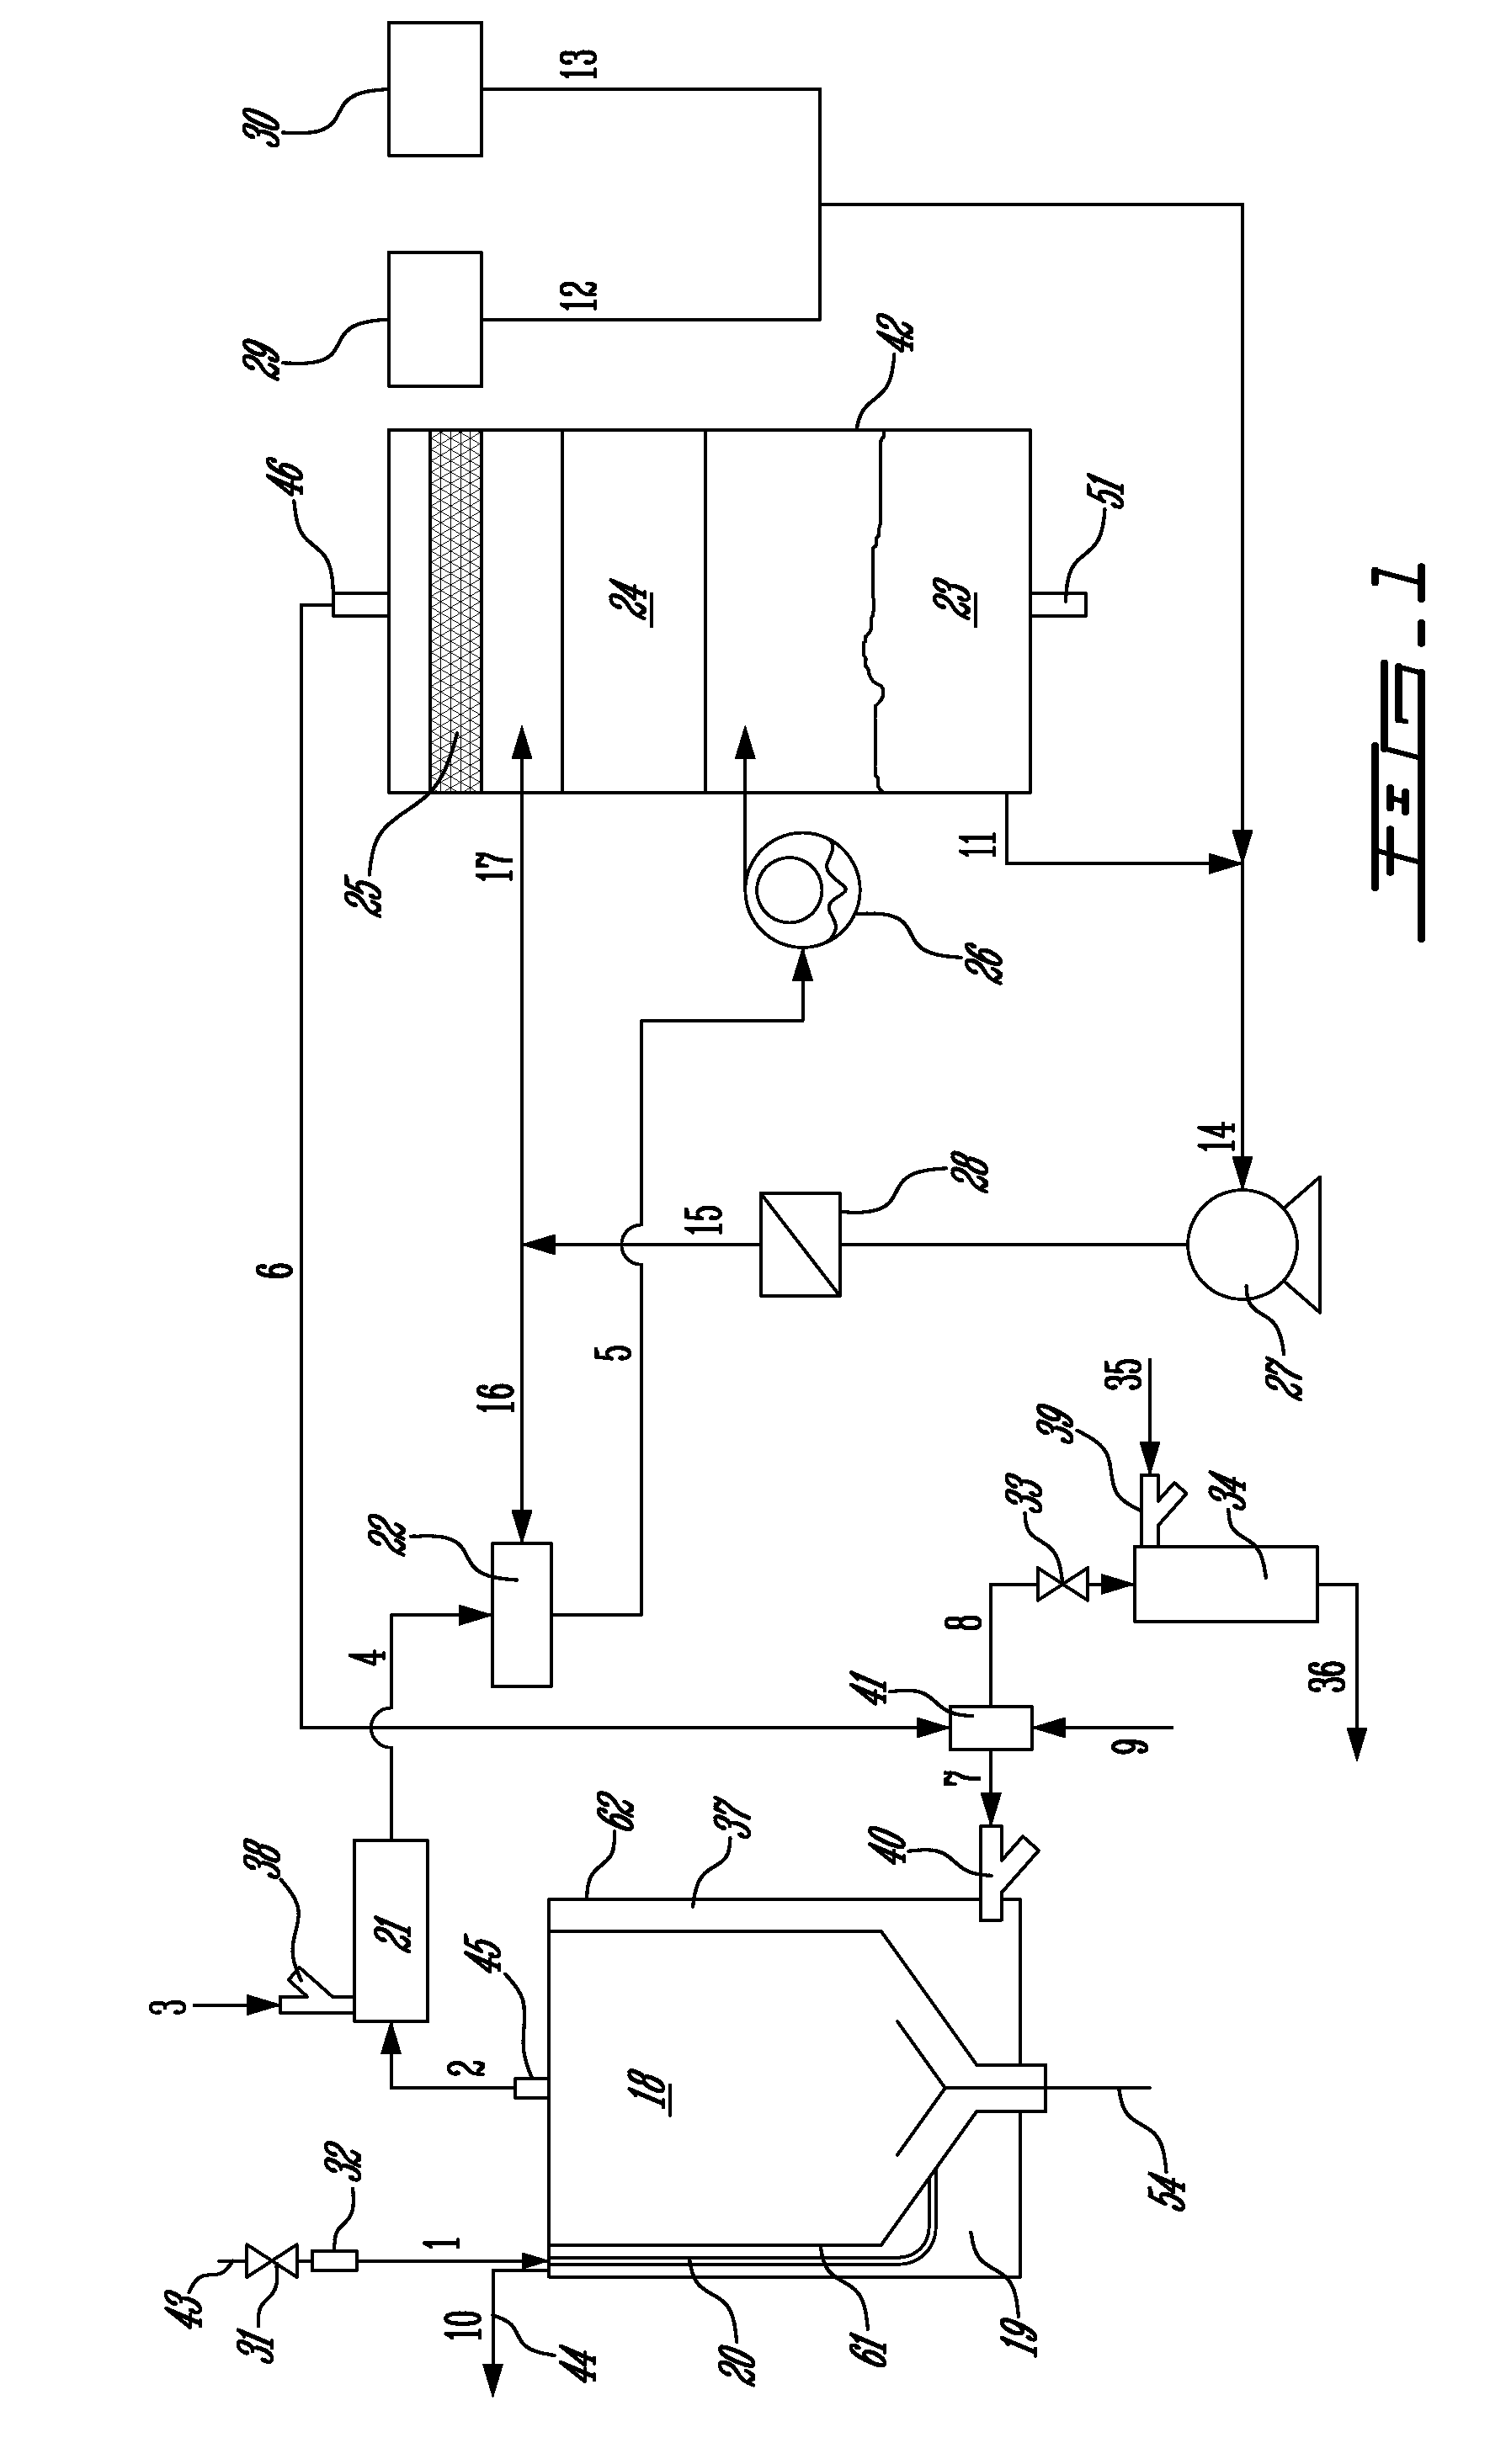 Method and apparatus for gasification of organic waste in batches